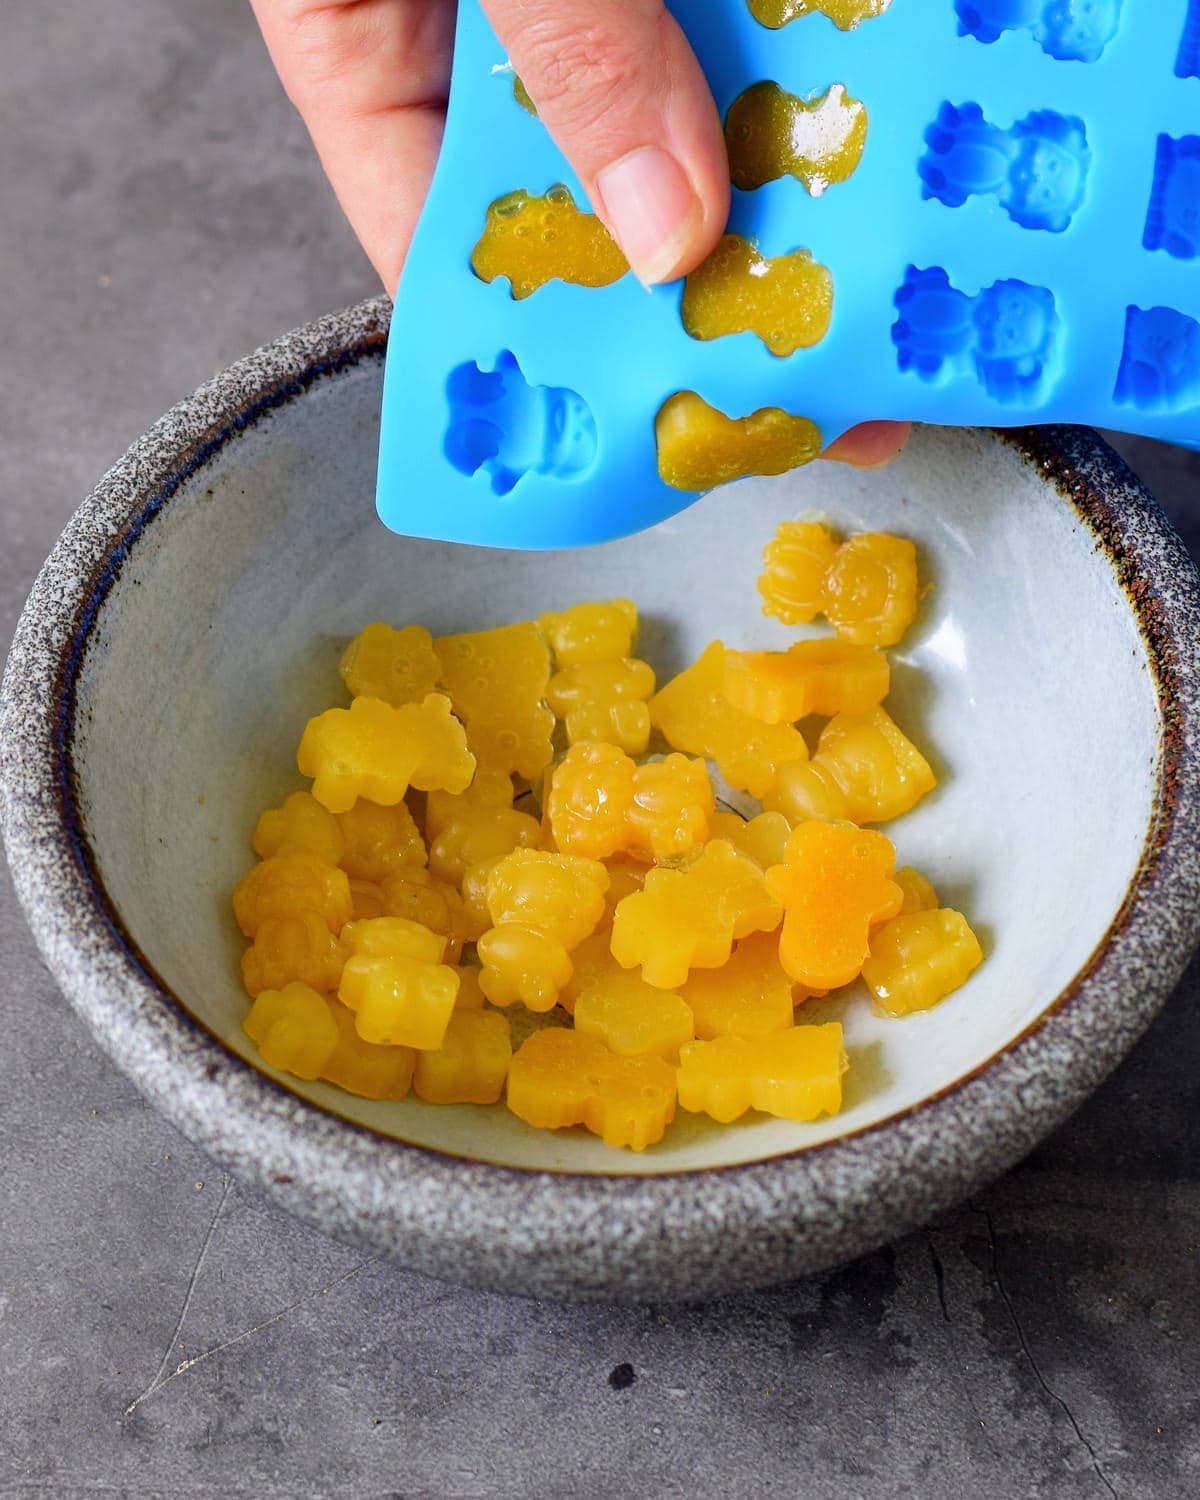 popping yellow vegetarian gummies from blue silicone mold into bowl